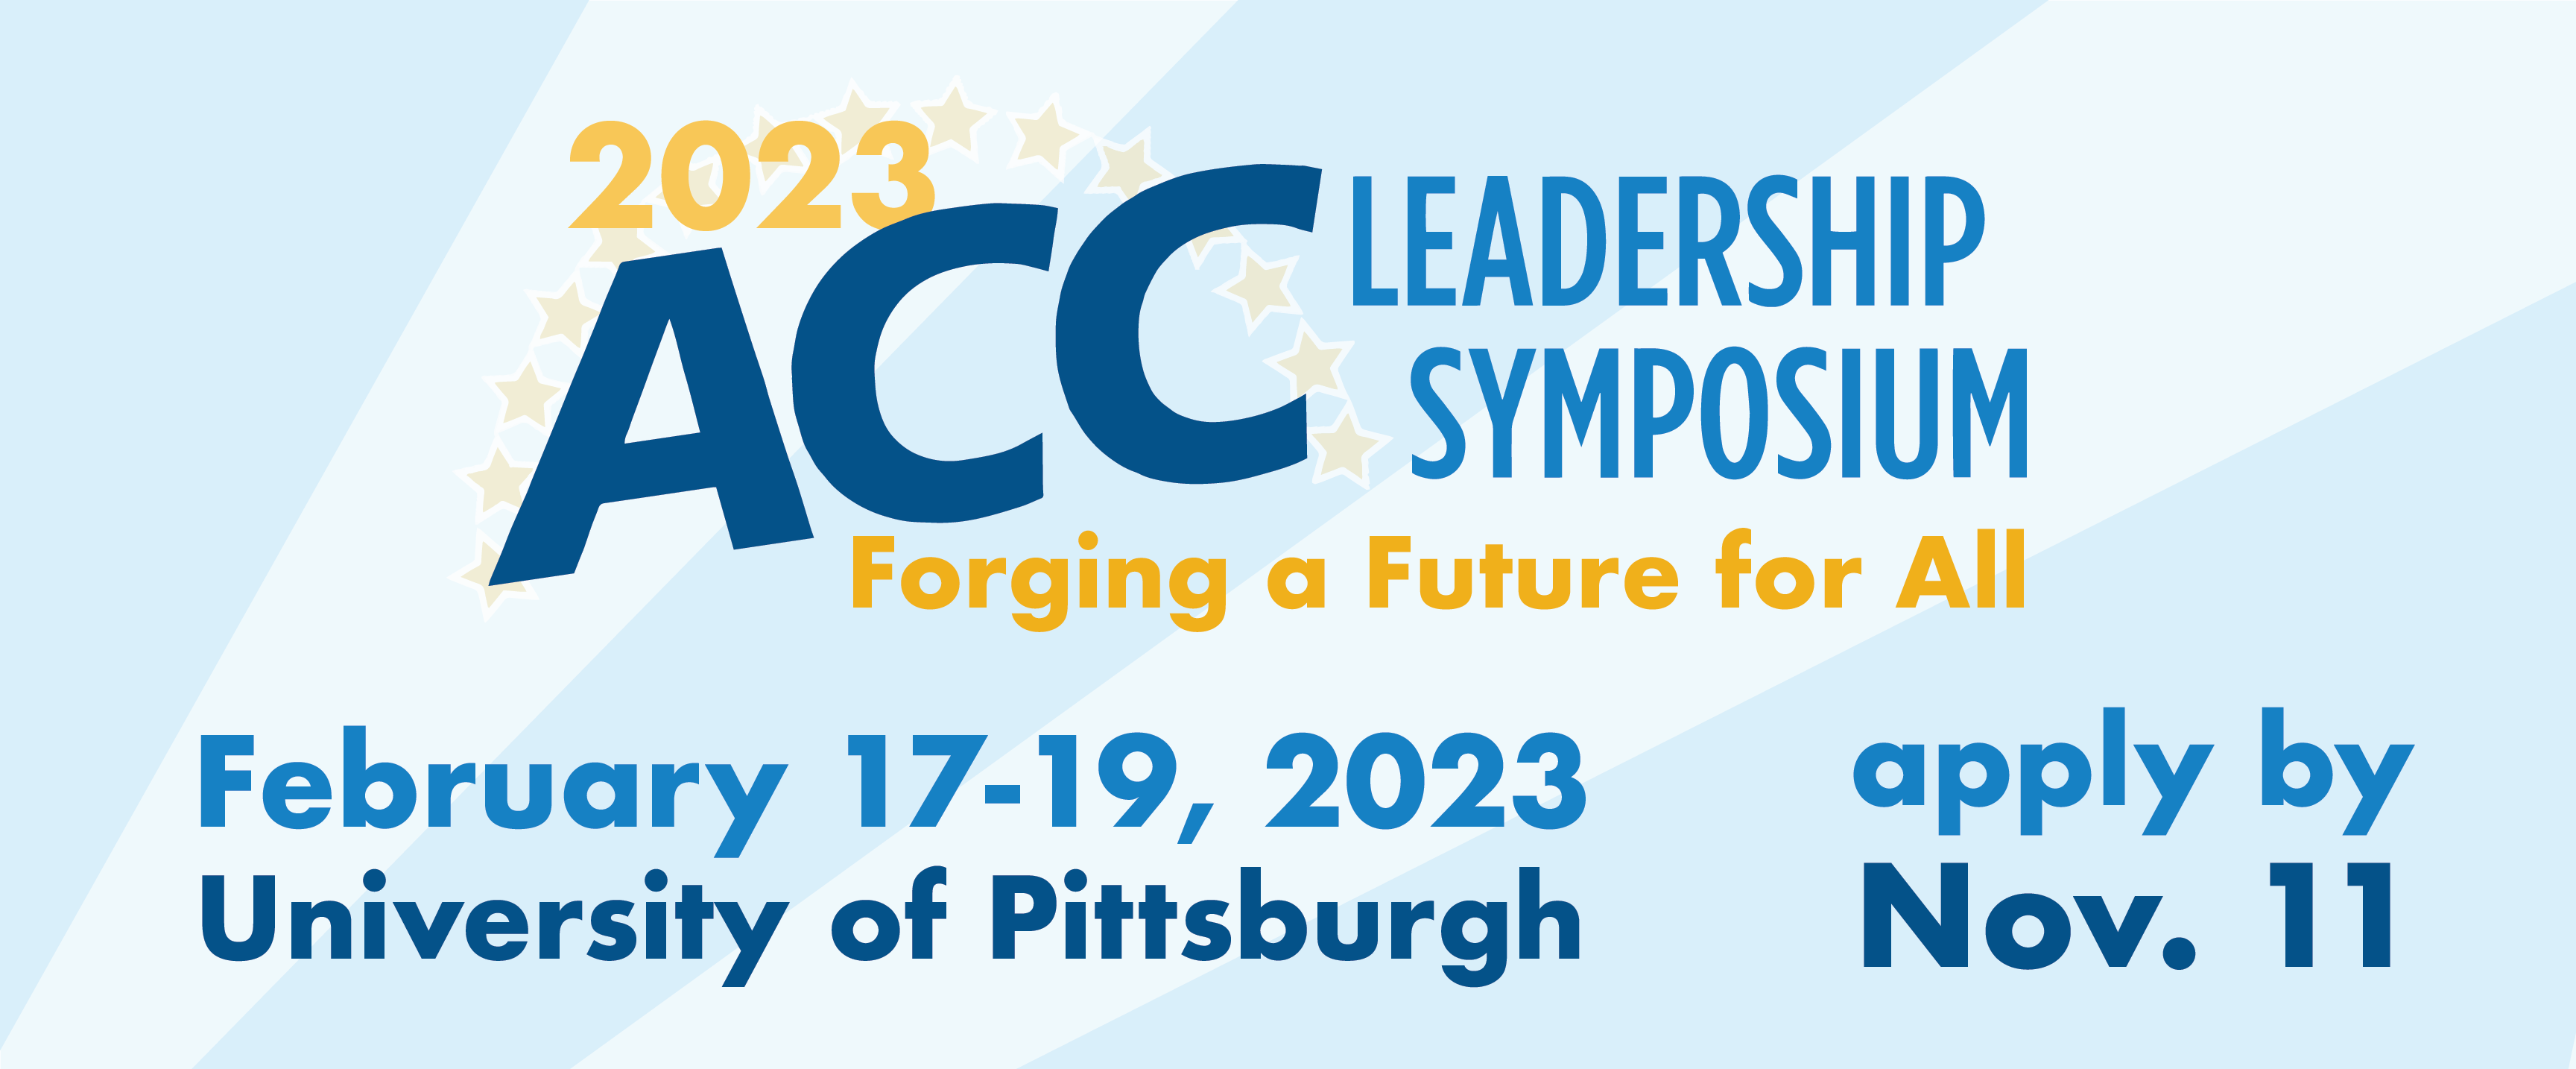 "ACC logo over light blue and white rays. 2023 ACC Leadership Symposium: Forging a Future for All"